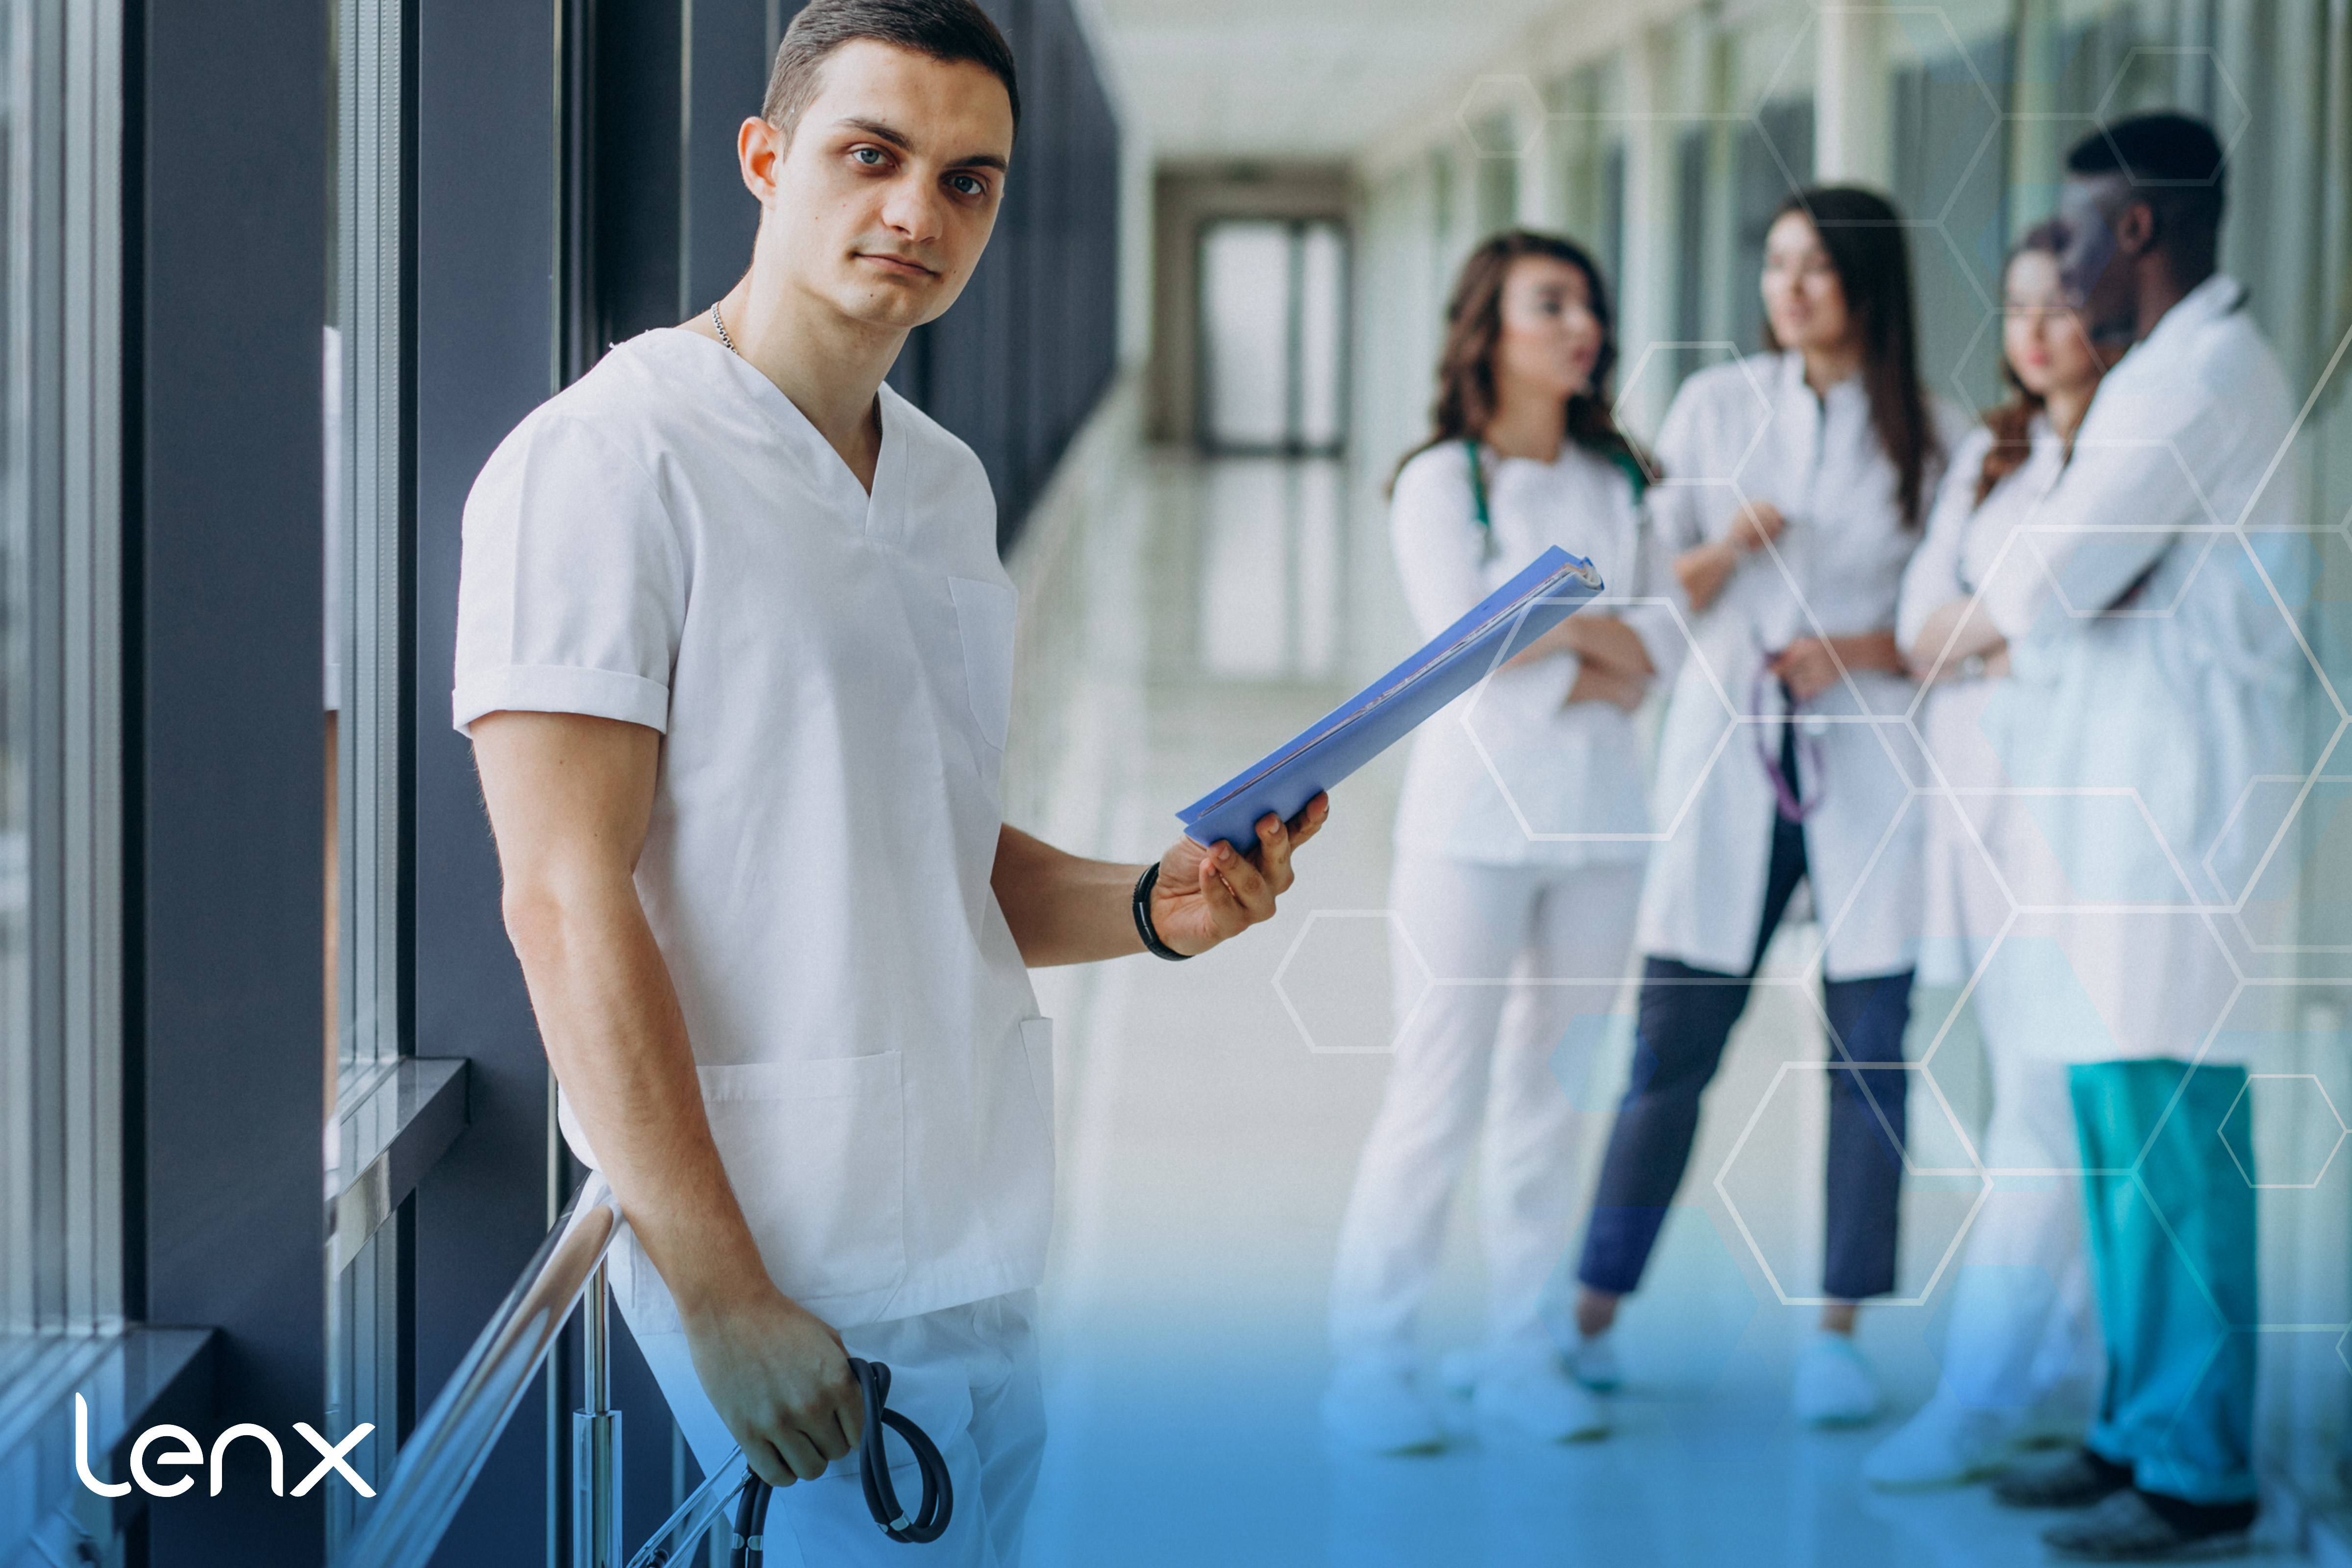 Active Shooter Detection and AI Security's Role In Protecting Healthcare Workers